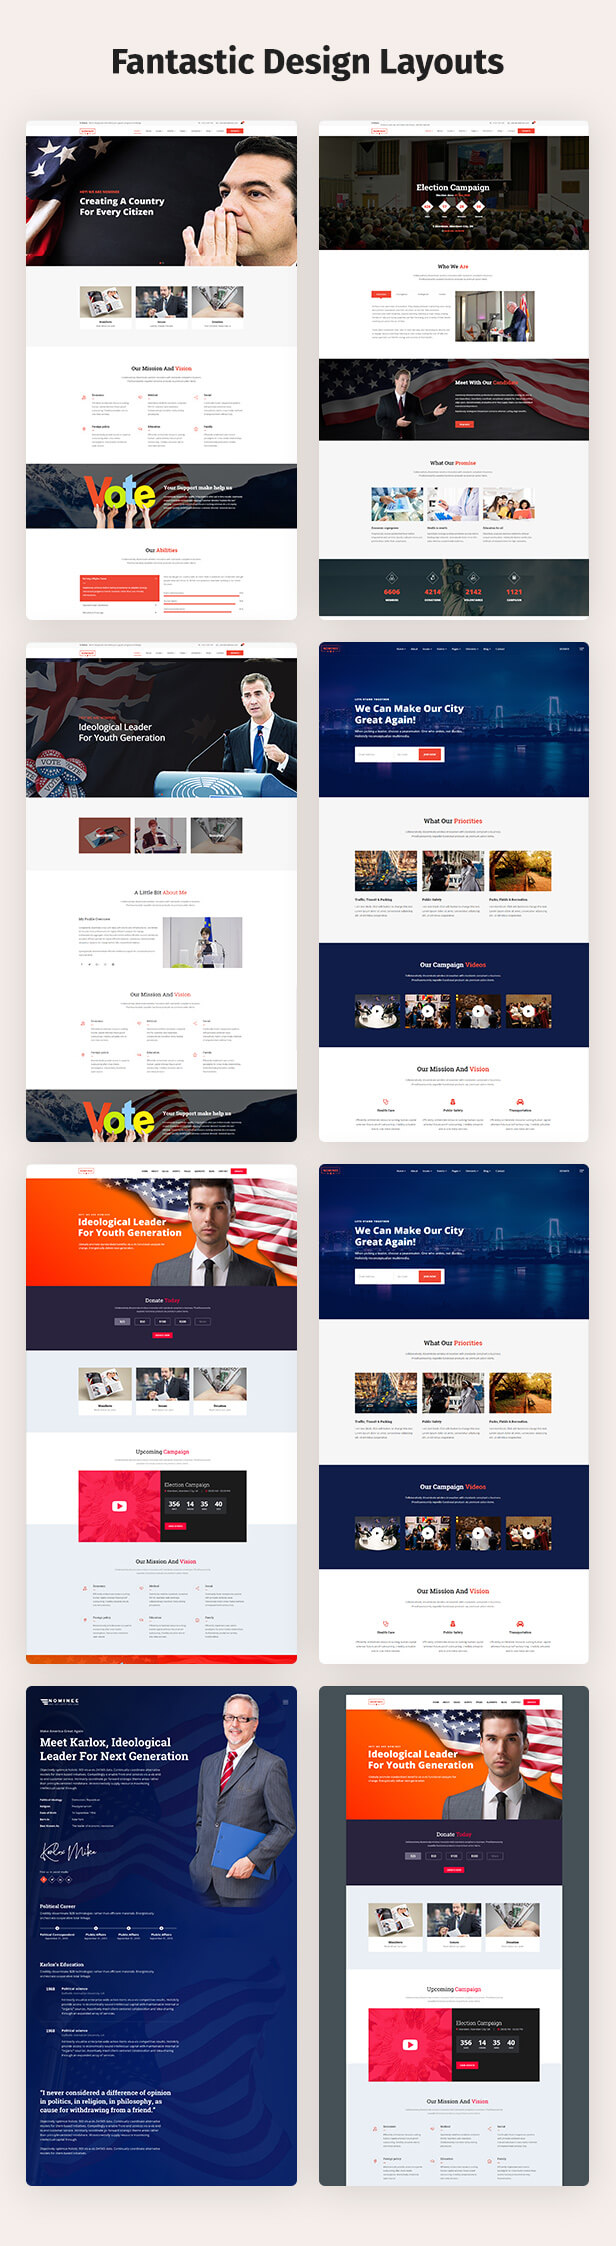 6 - Nominee - Political WordPress Theme for Candidate/Political Leader